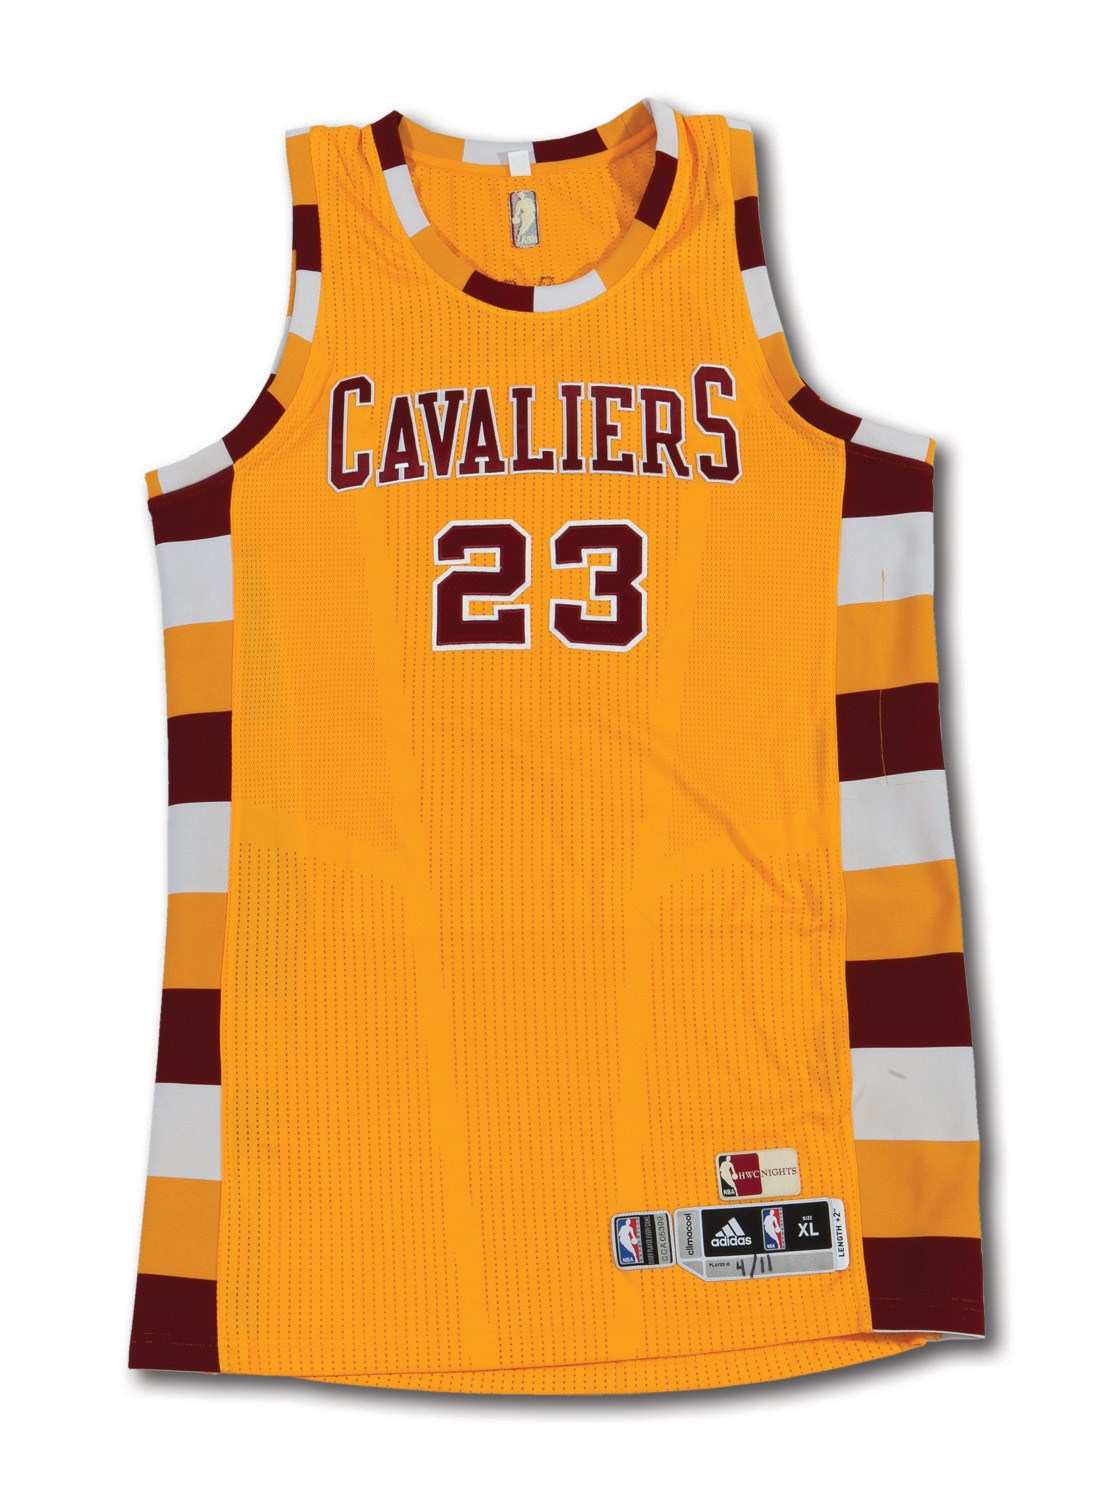 Cleveland Cavs Scrubbing LeBron from Team Shop, Slashing Jersey Prices